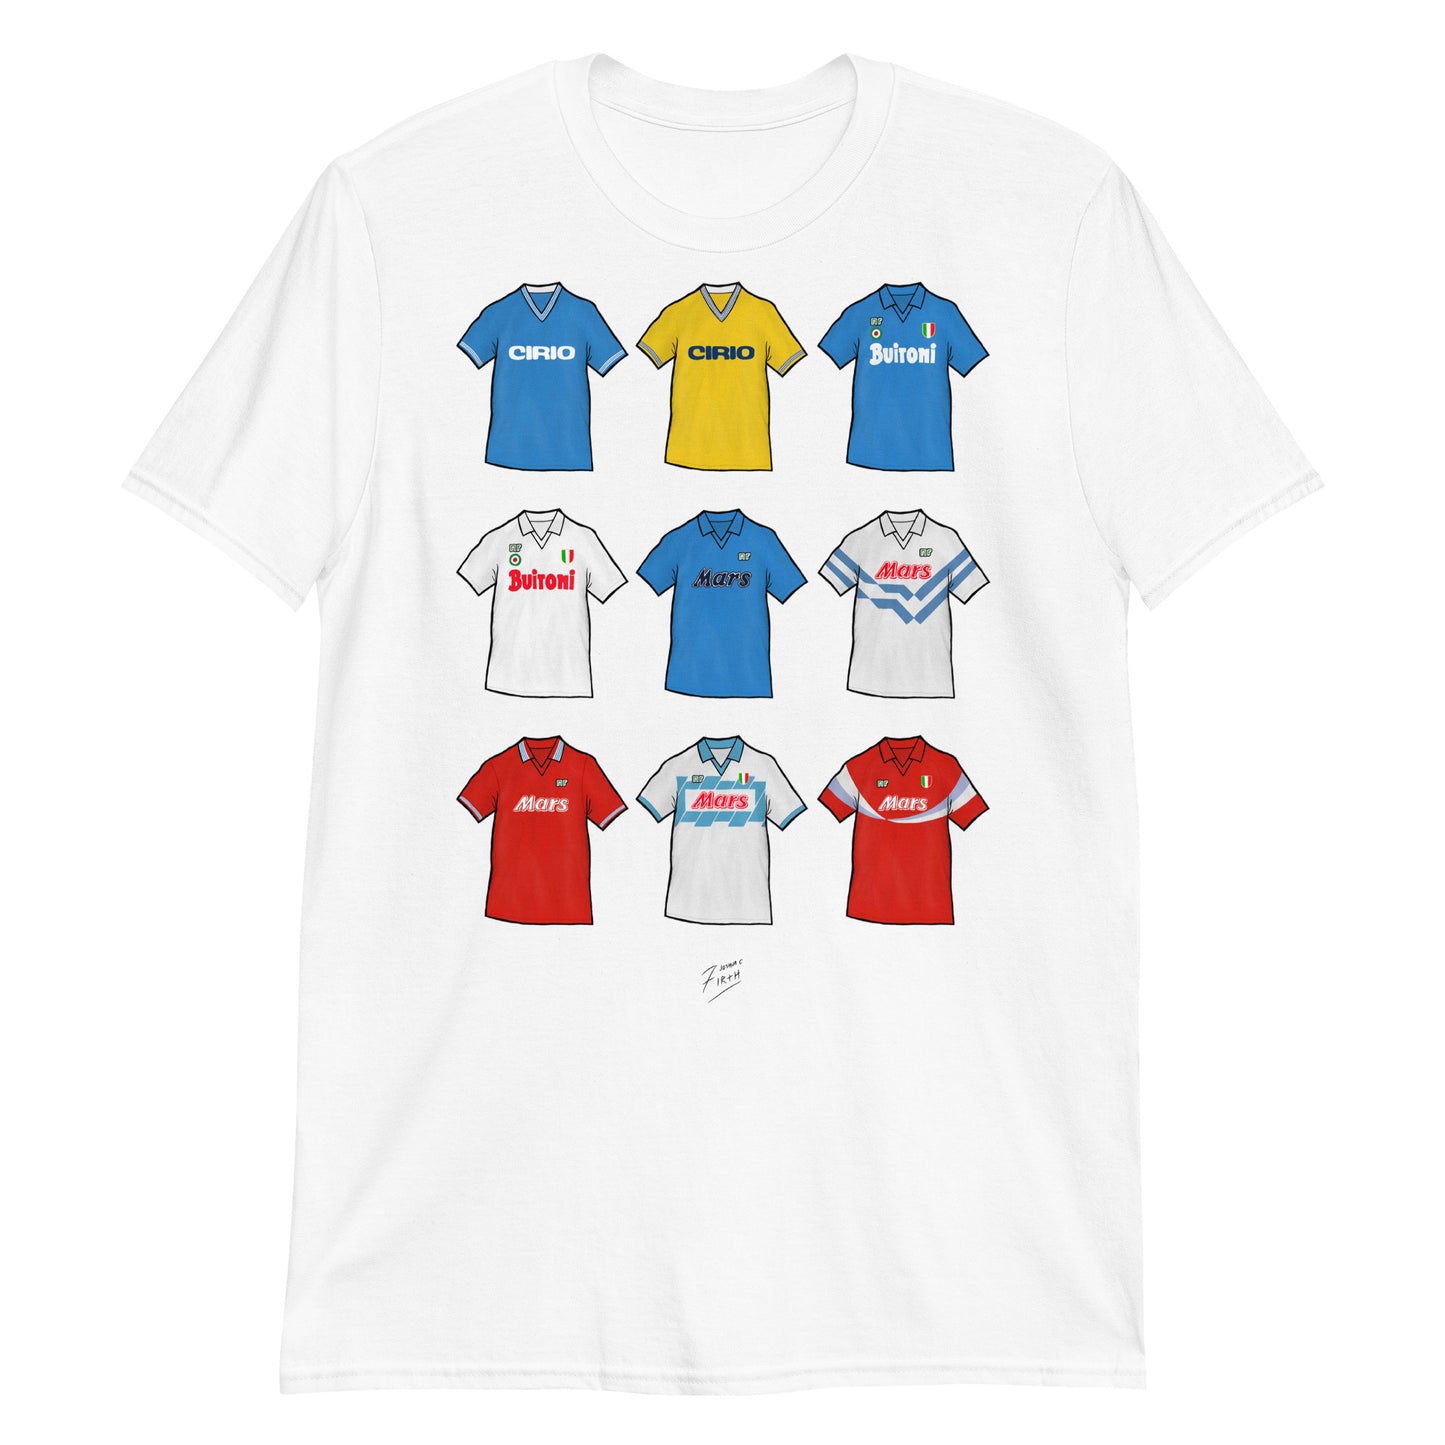 White Napoli Themed T-shirt inspired by the jerseys of the past from when Diego Maradona used to play for them!